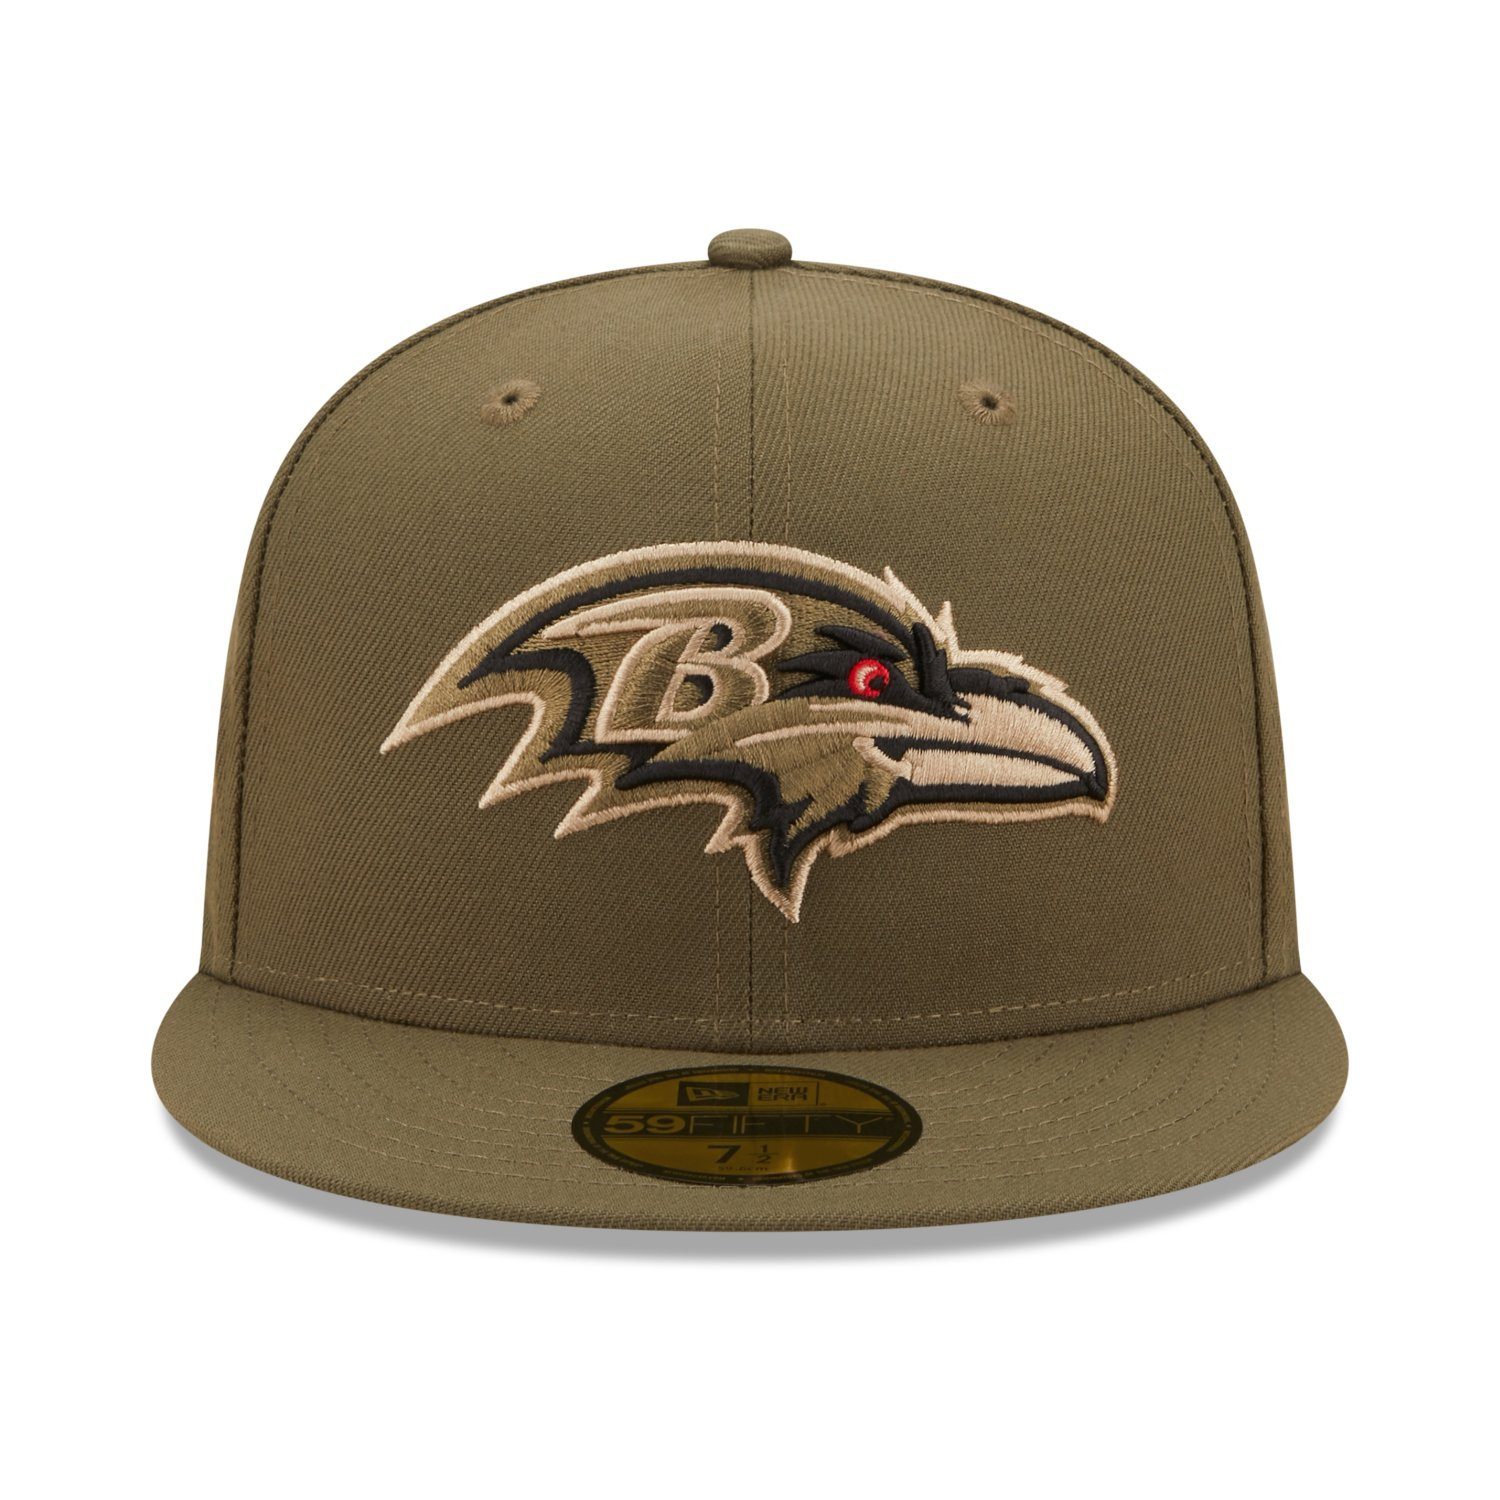 New Era Fitted Baltimore NFL Throwback Superbowl ProBowl Ravens Cap 59Fifty